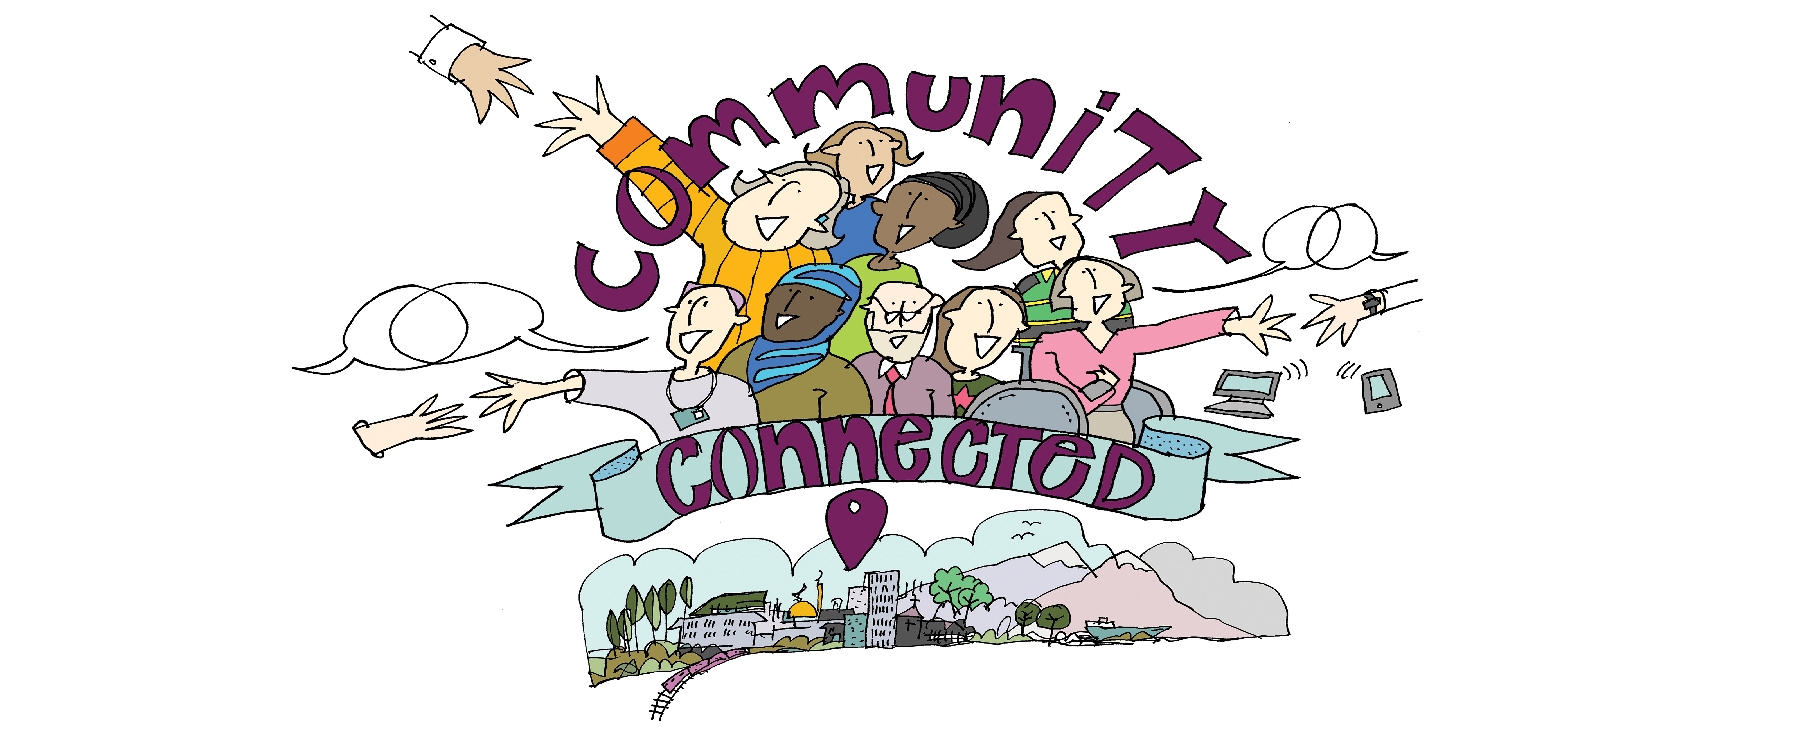 Community connected image